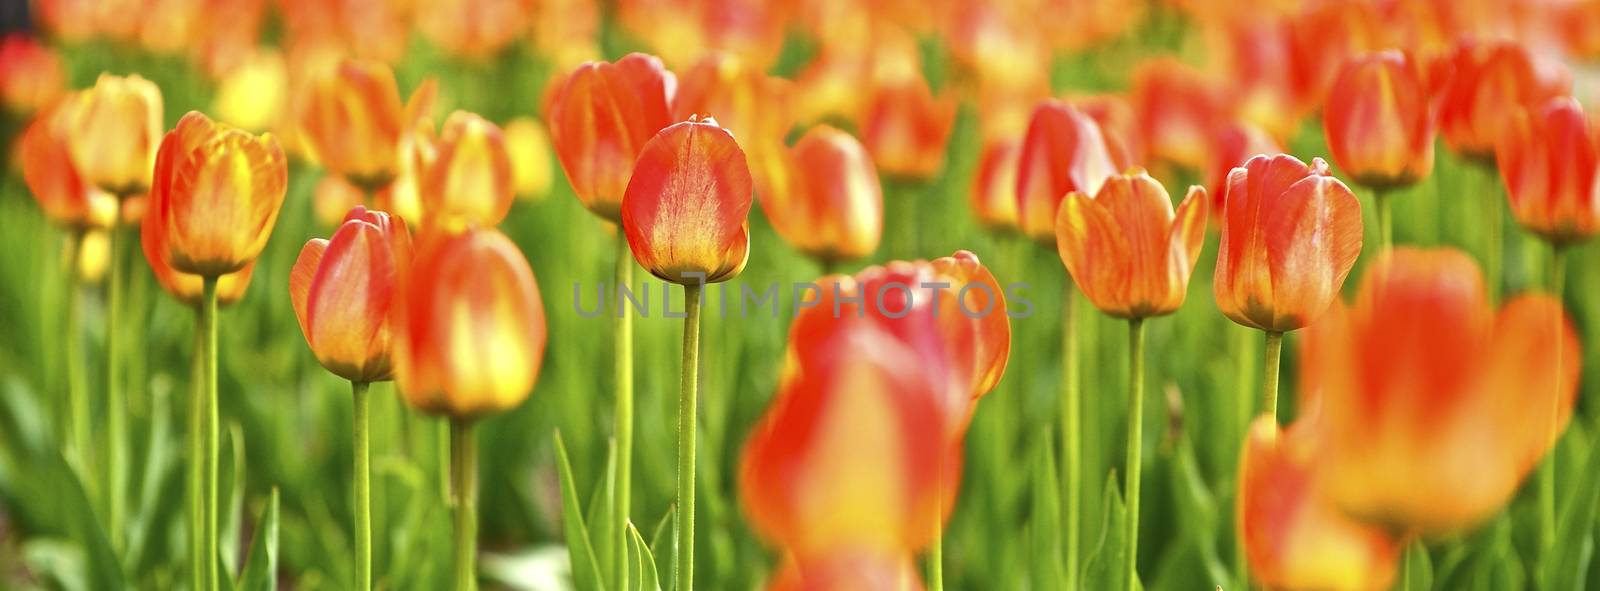 Tulips Panoramic Photo. The Tulip is a Perennial, Bulbous Plant with Showy Flowers in the Genus Tulipa, Which Comprises 109 Species and Belongs to the Family Liliaceae. Flowers Photo Collection.